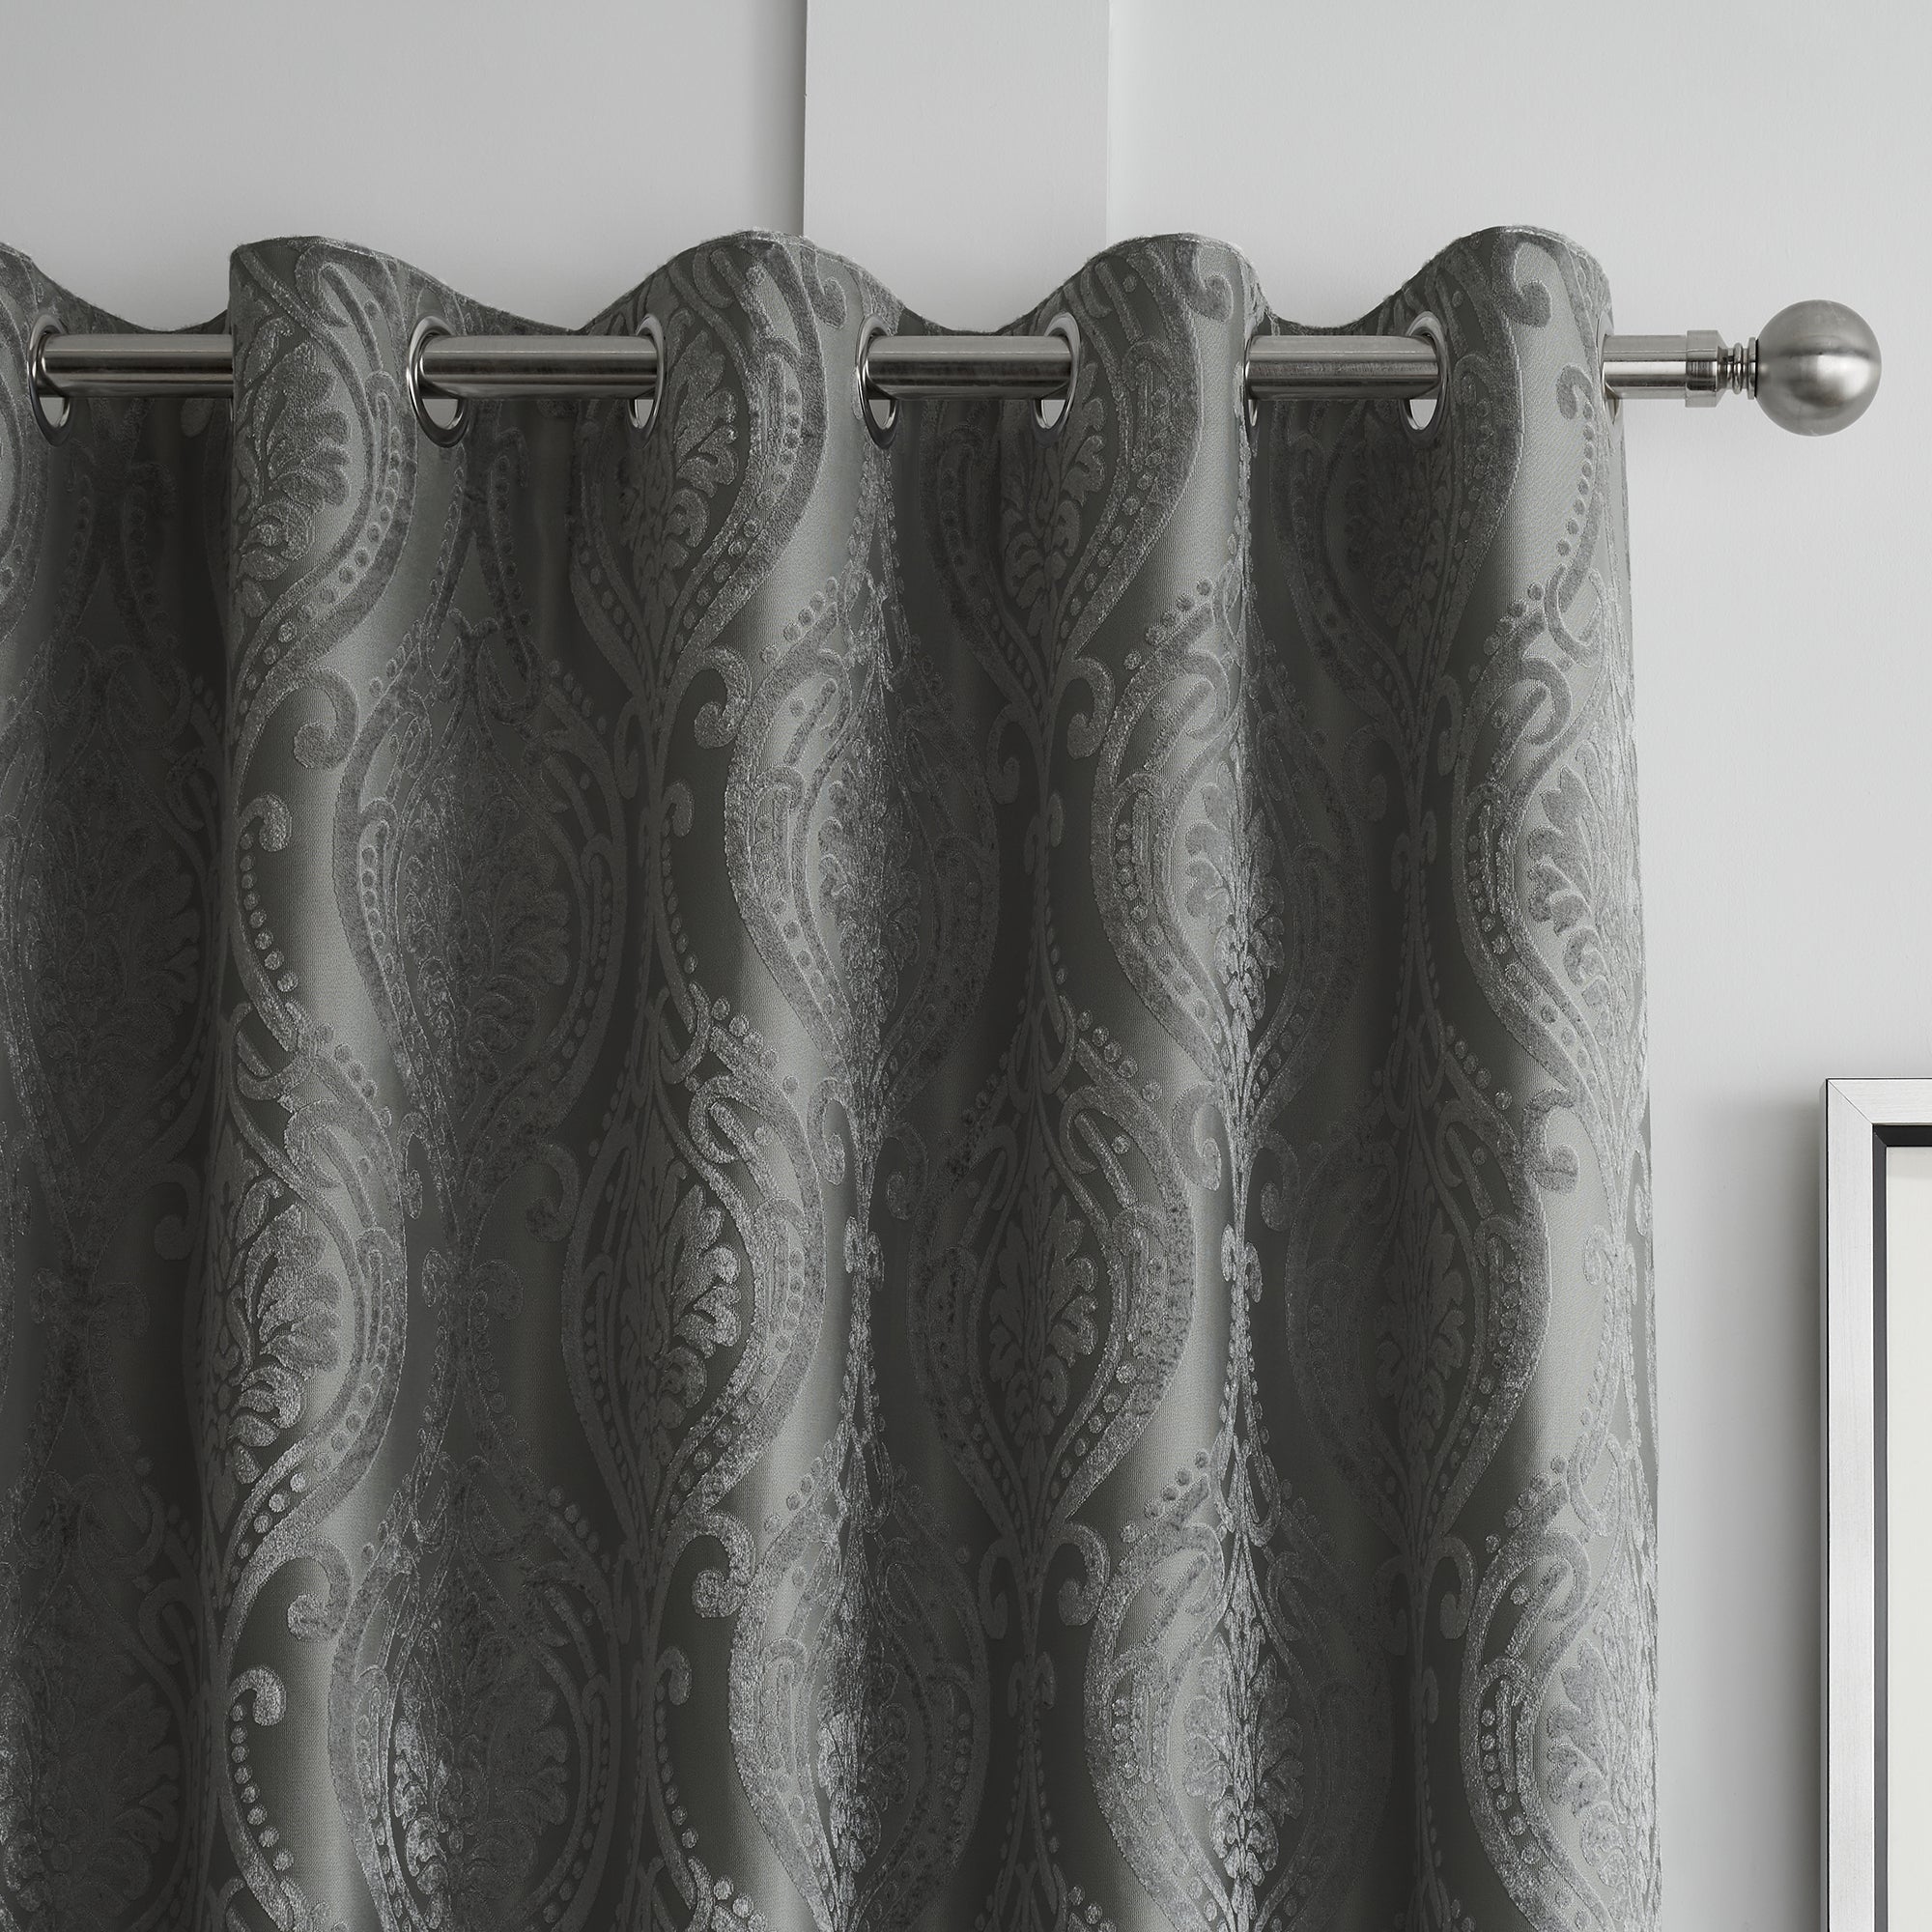 Chateau - Jacquard Pair of Eyelet Curtains in Slate - By Curtina